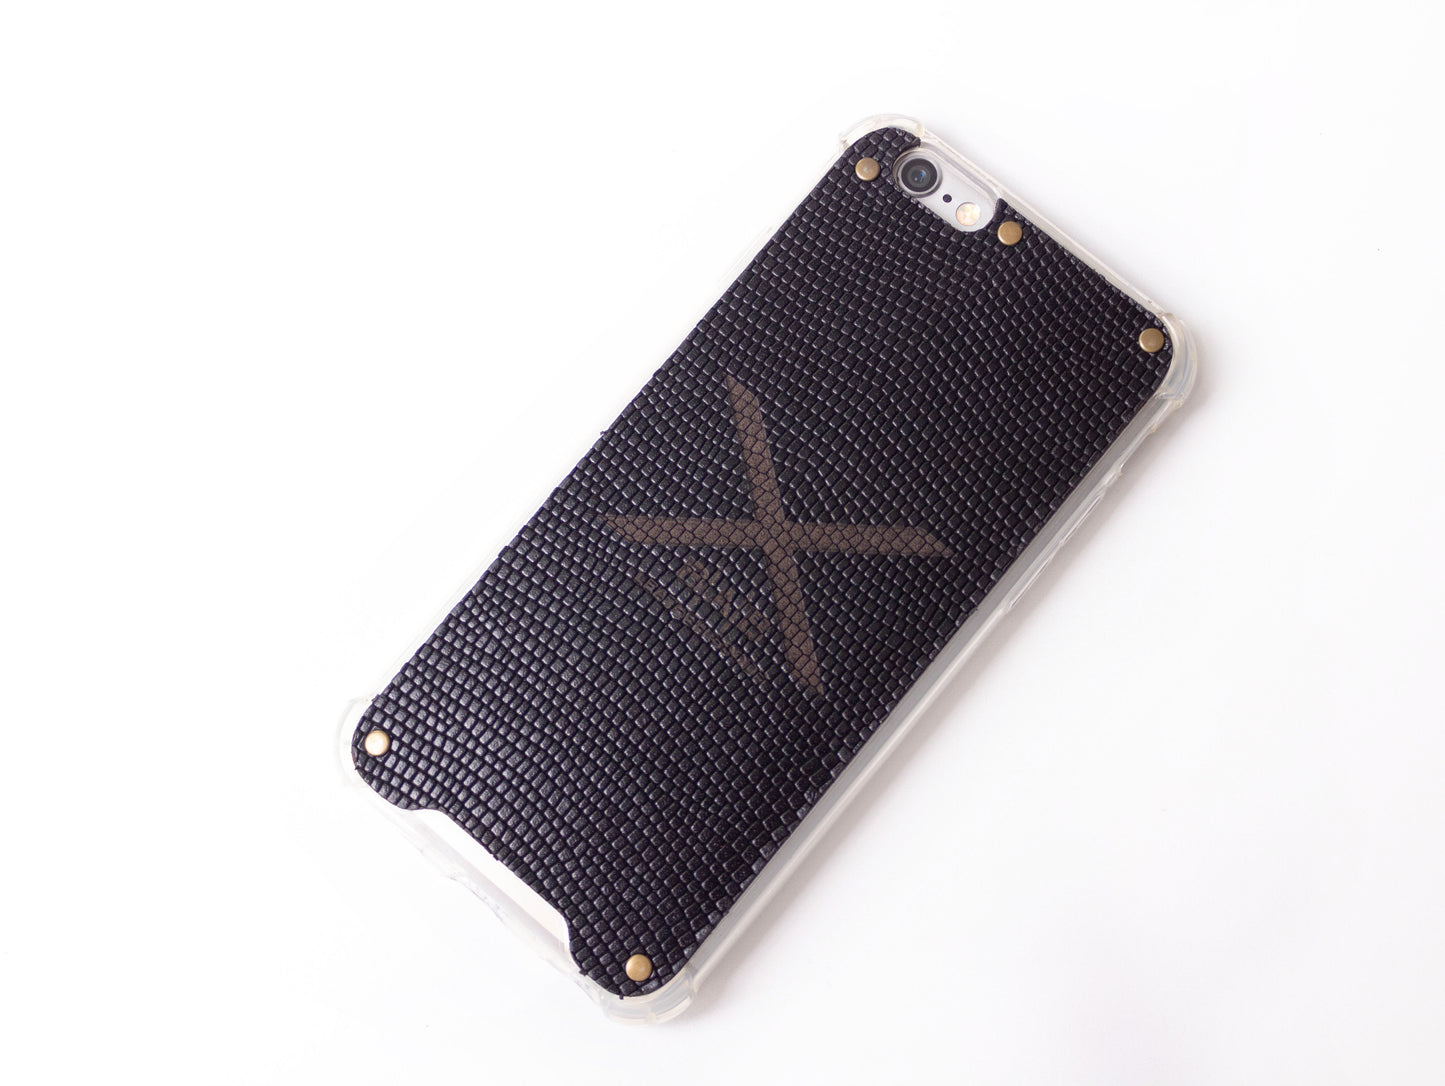 Textured Black Snake Patent Genuine Leather iPhone Case cut and laser engraved, 5 Bronze Rivets.- F36